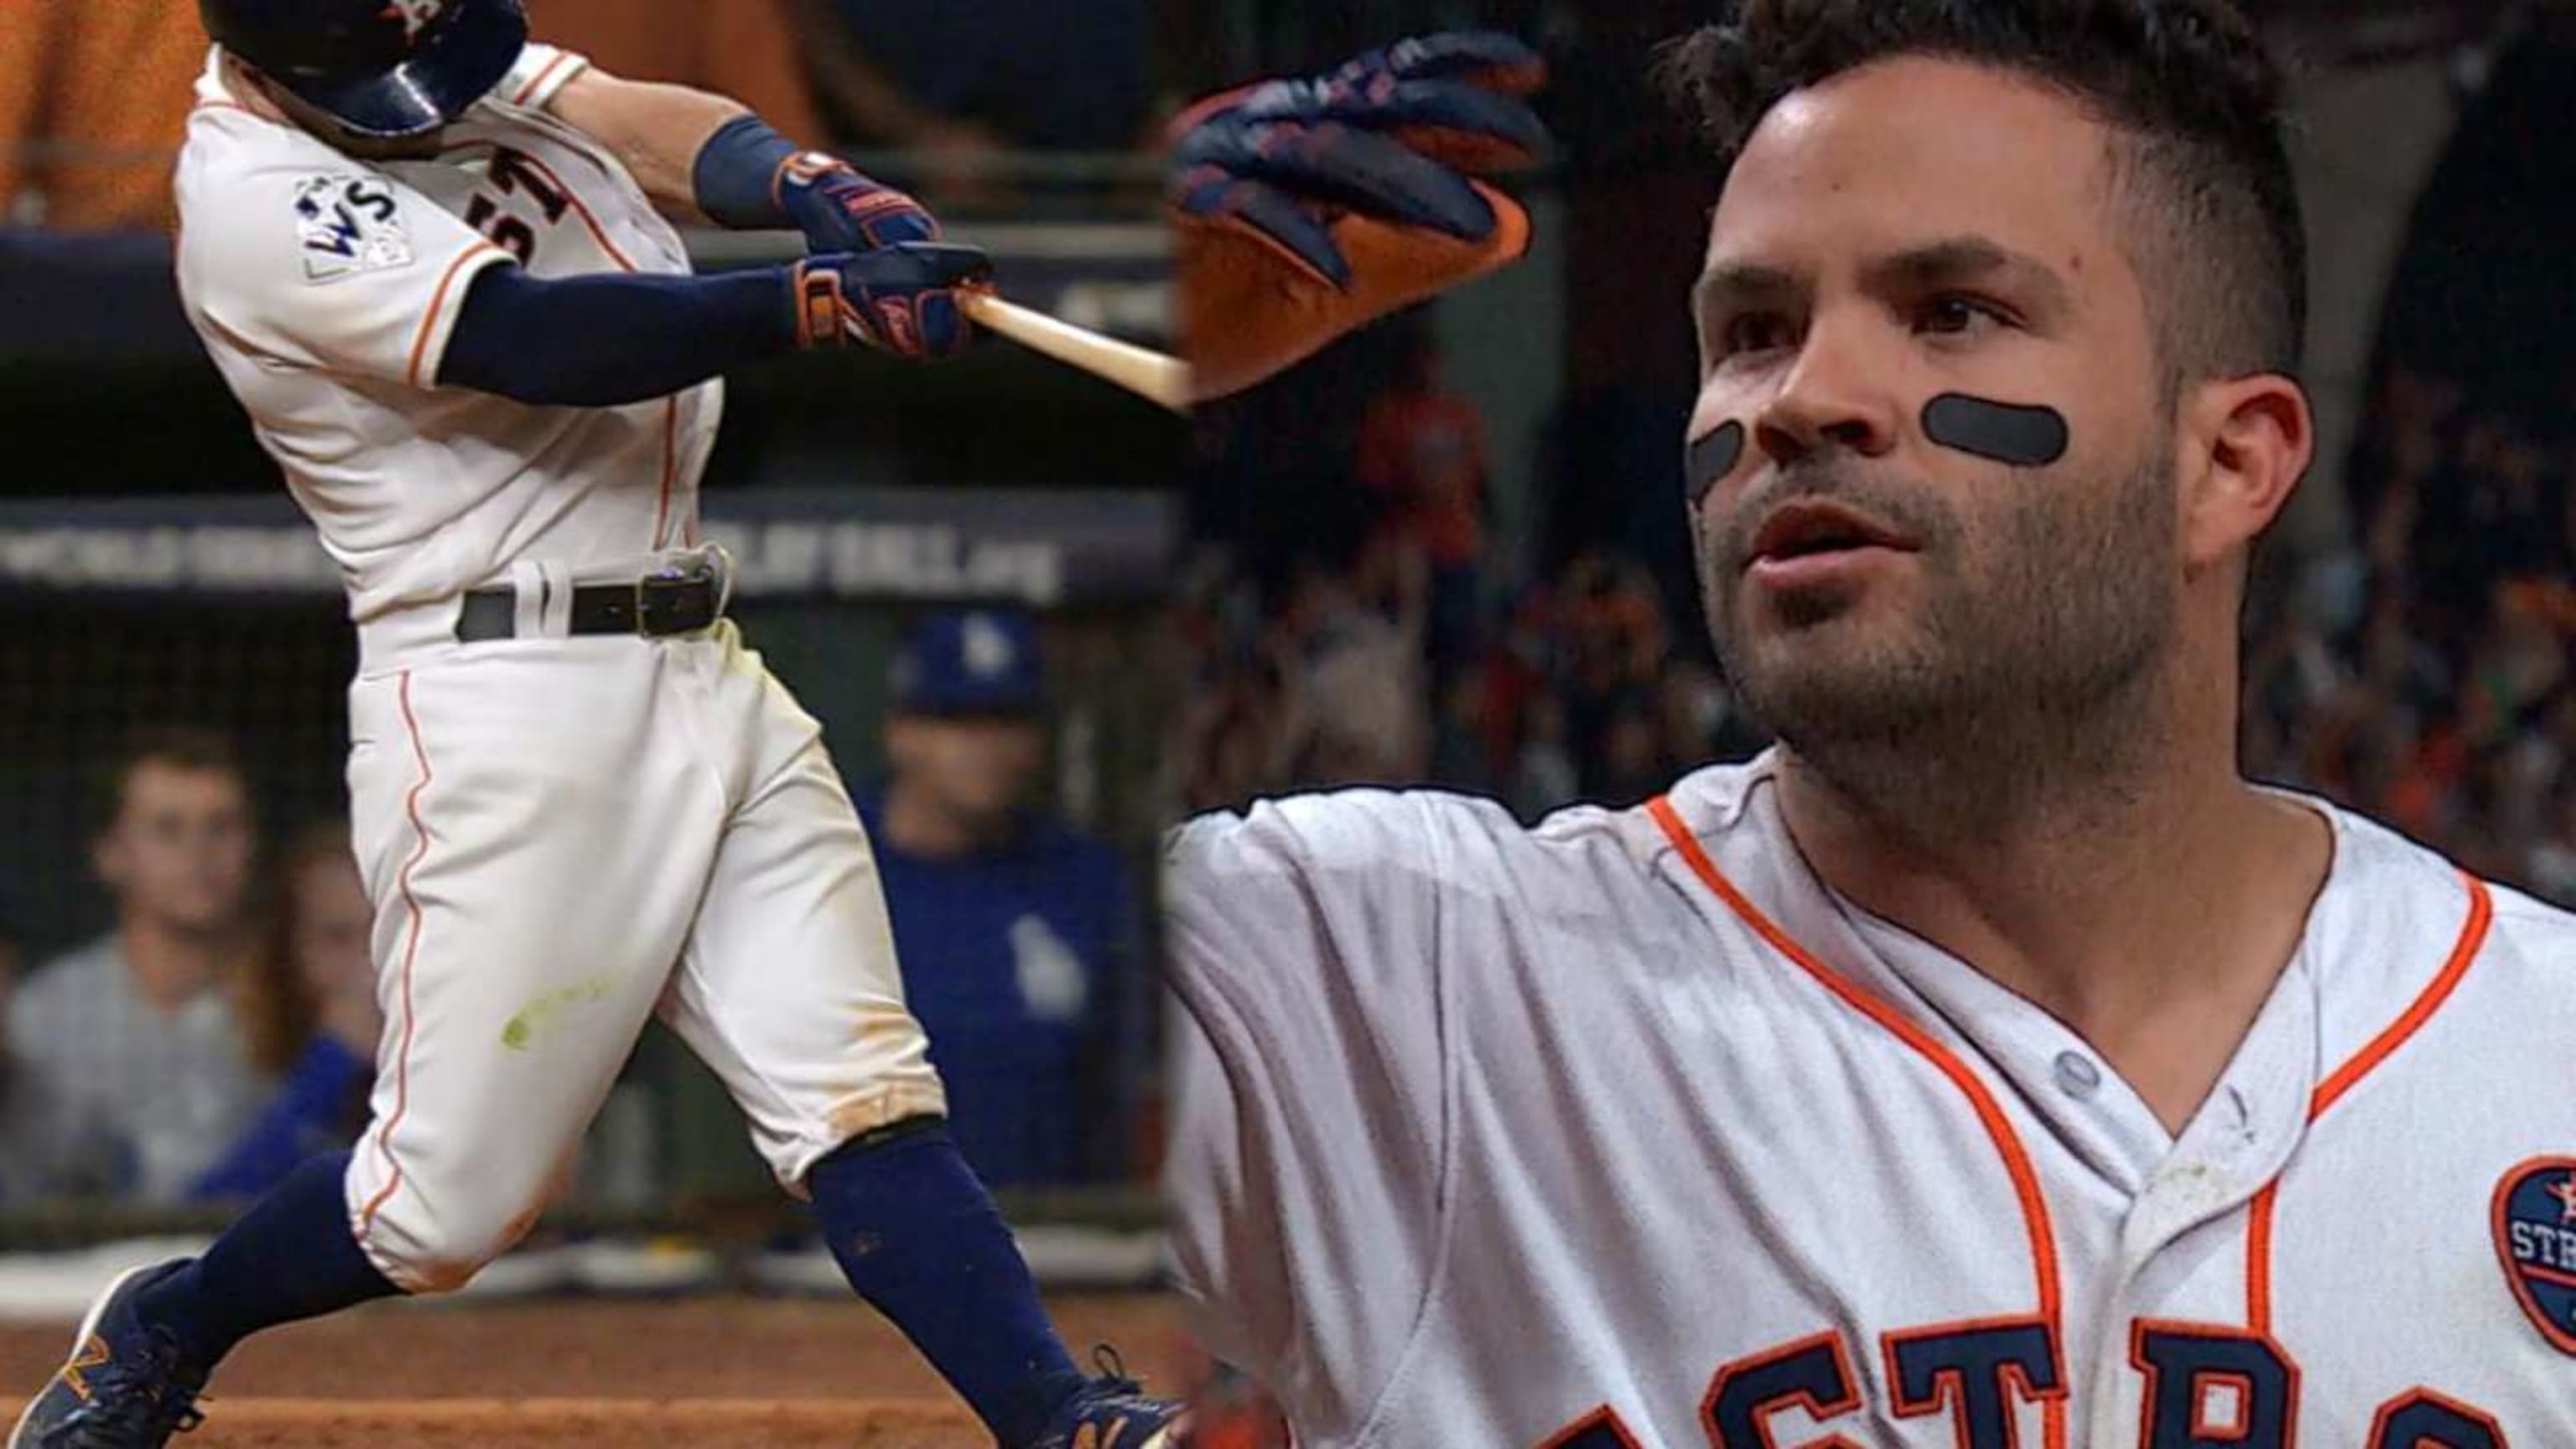 World Series coming out party for Jose Altuve